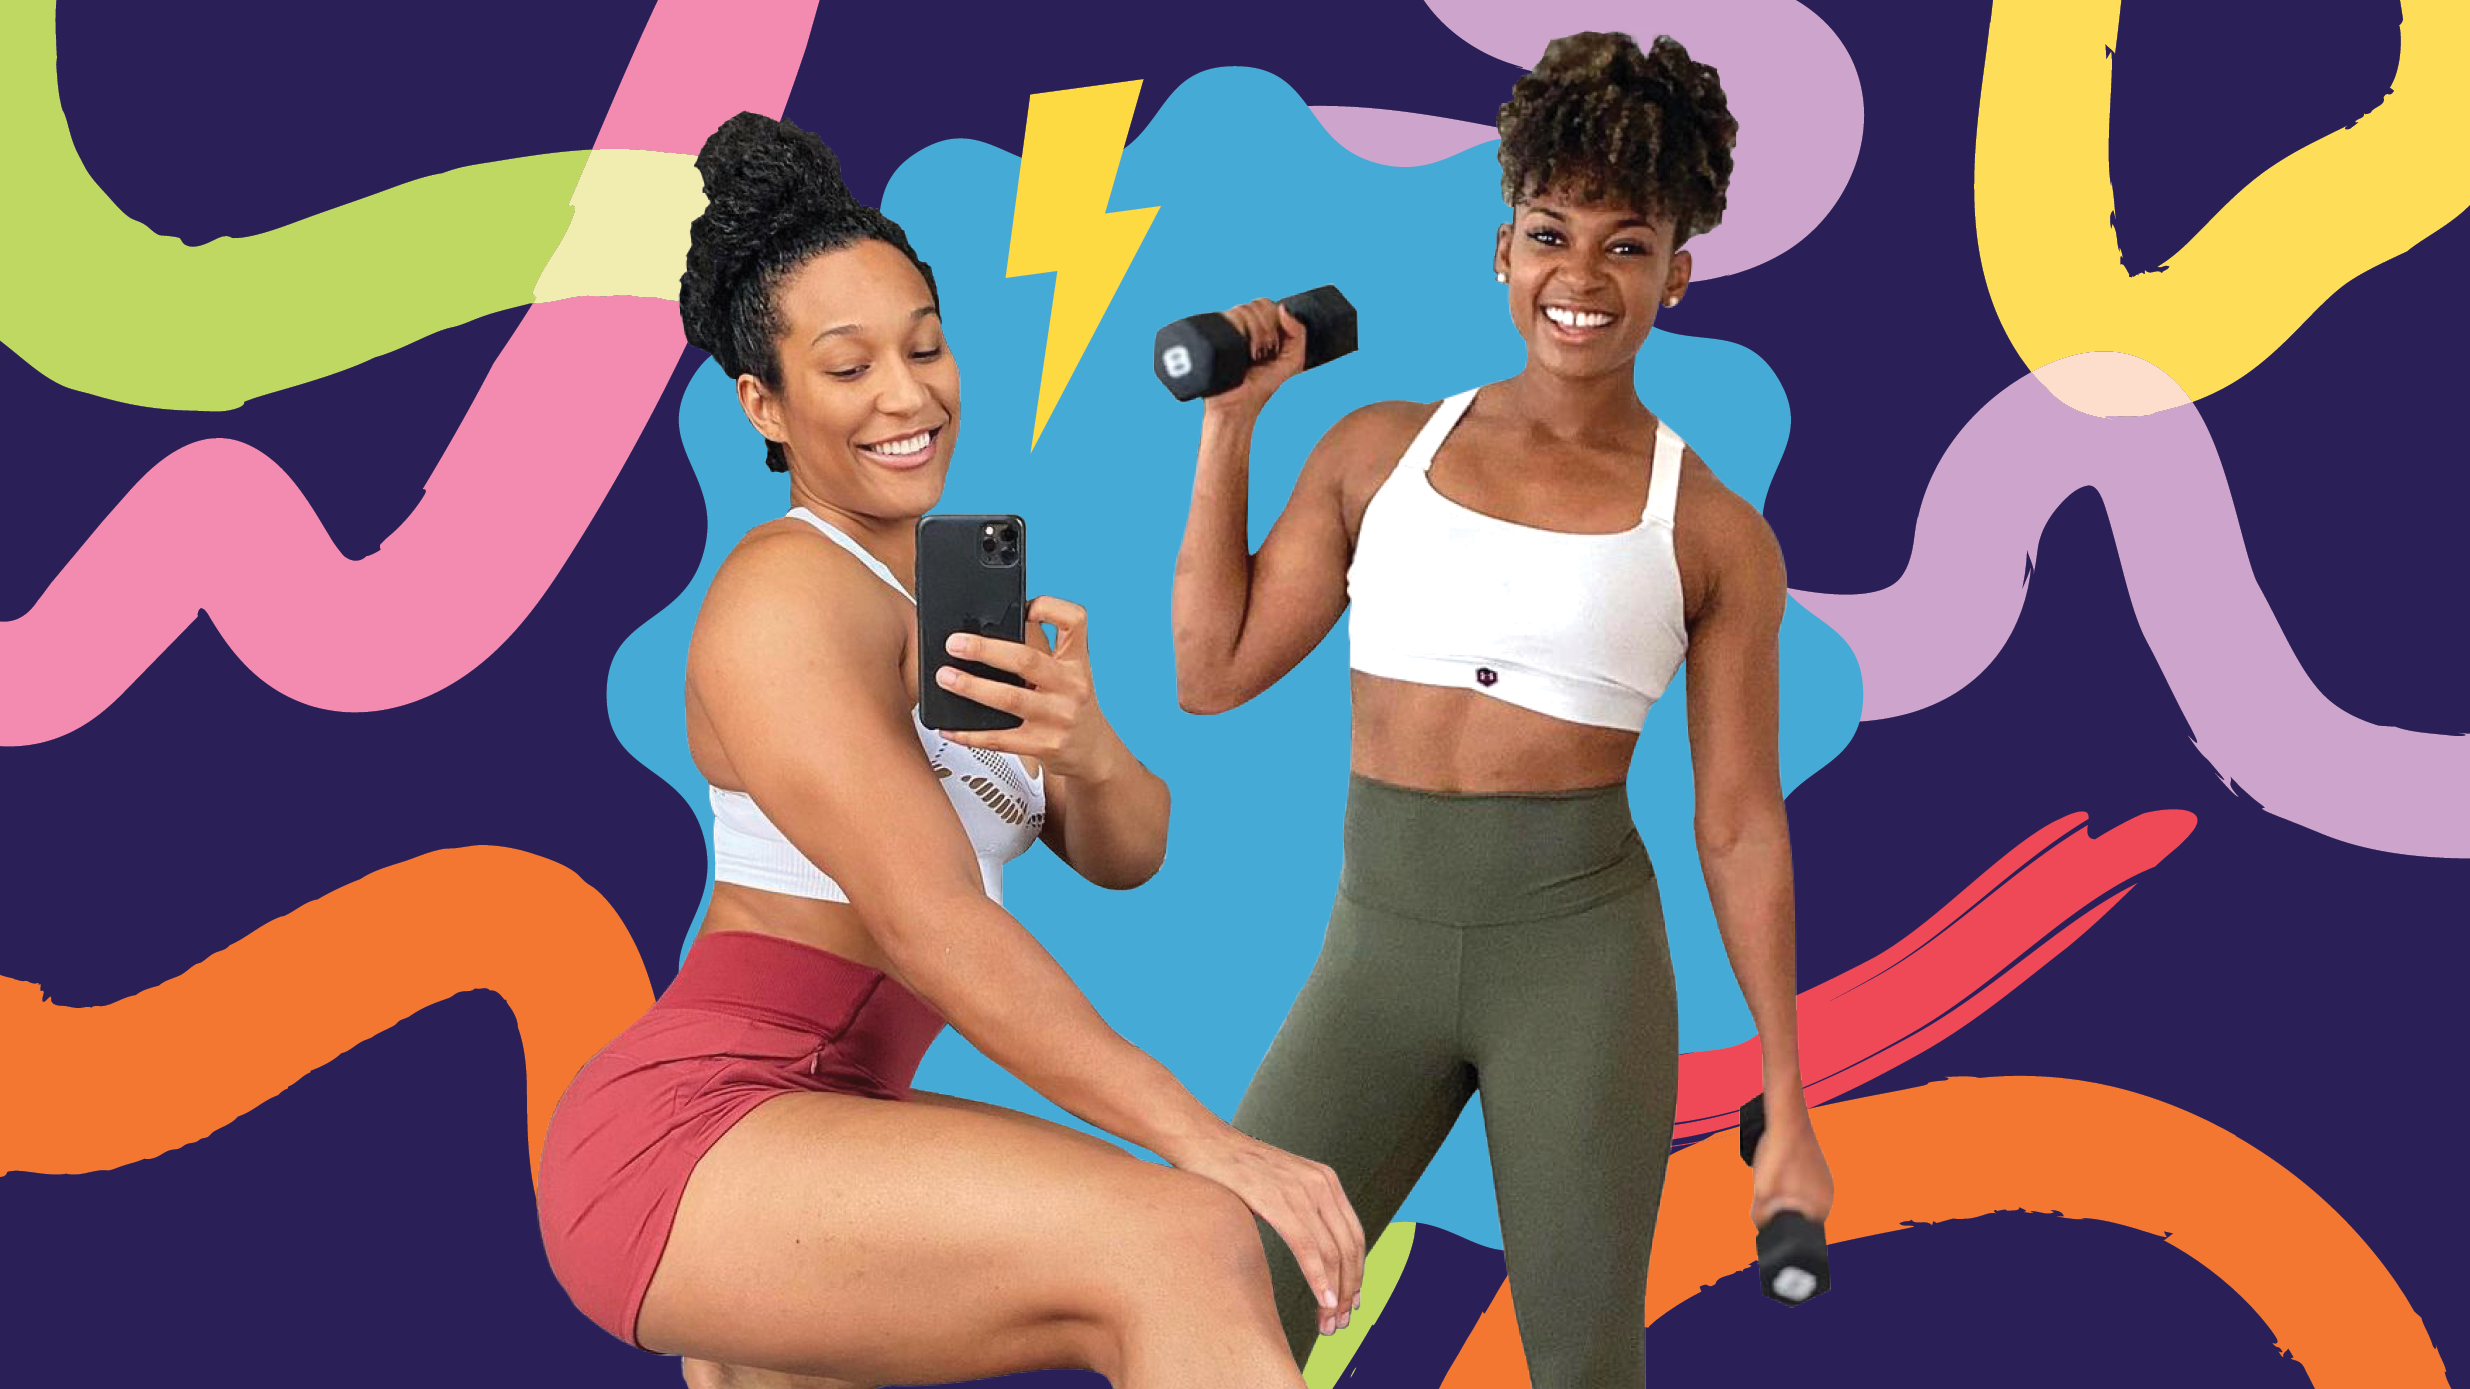 22 Black Trainers To Sweat With, Support During Black History Month